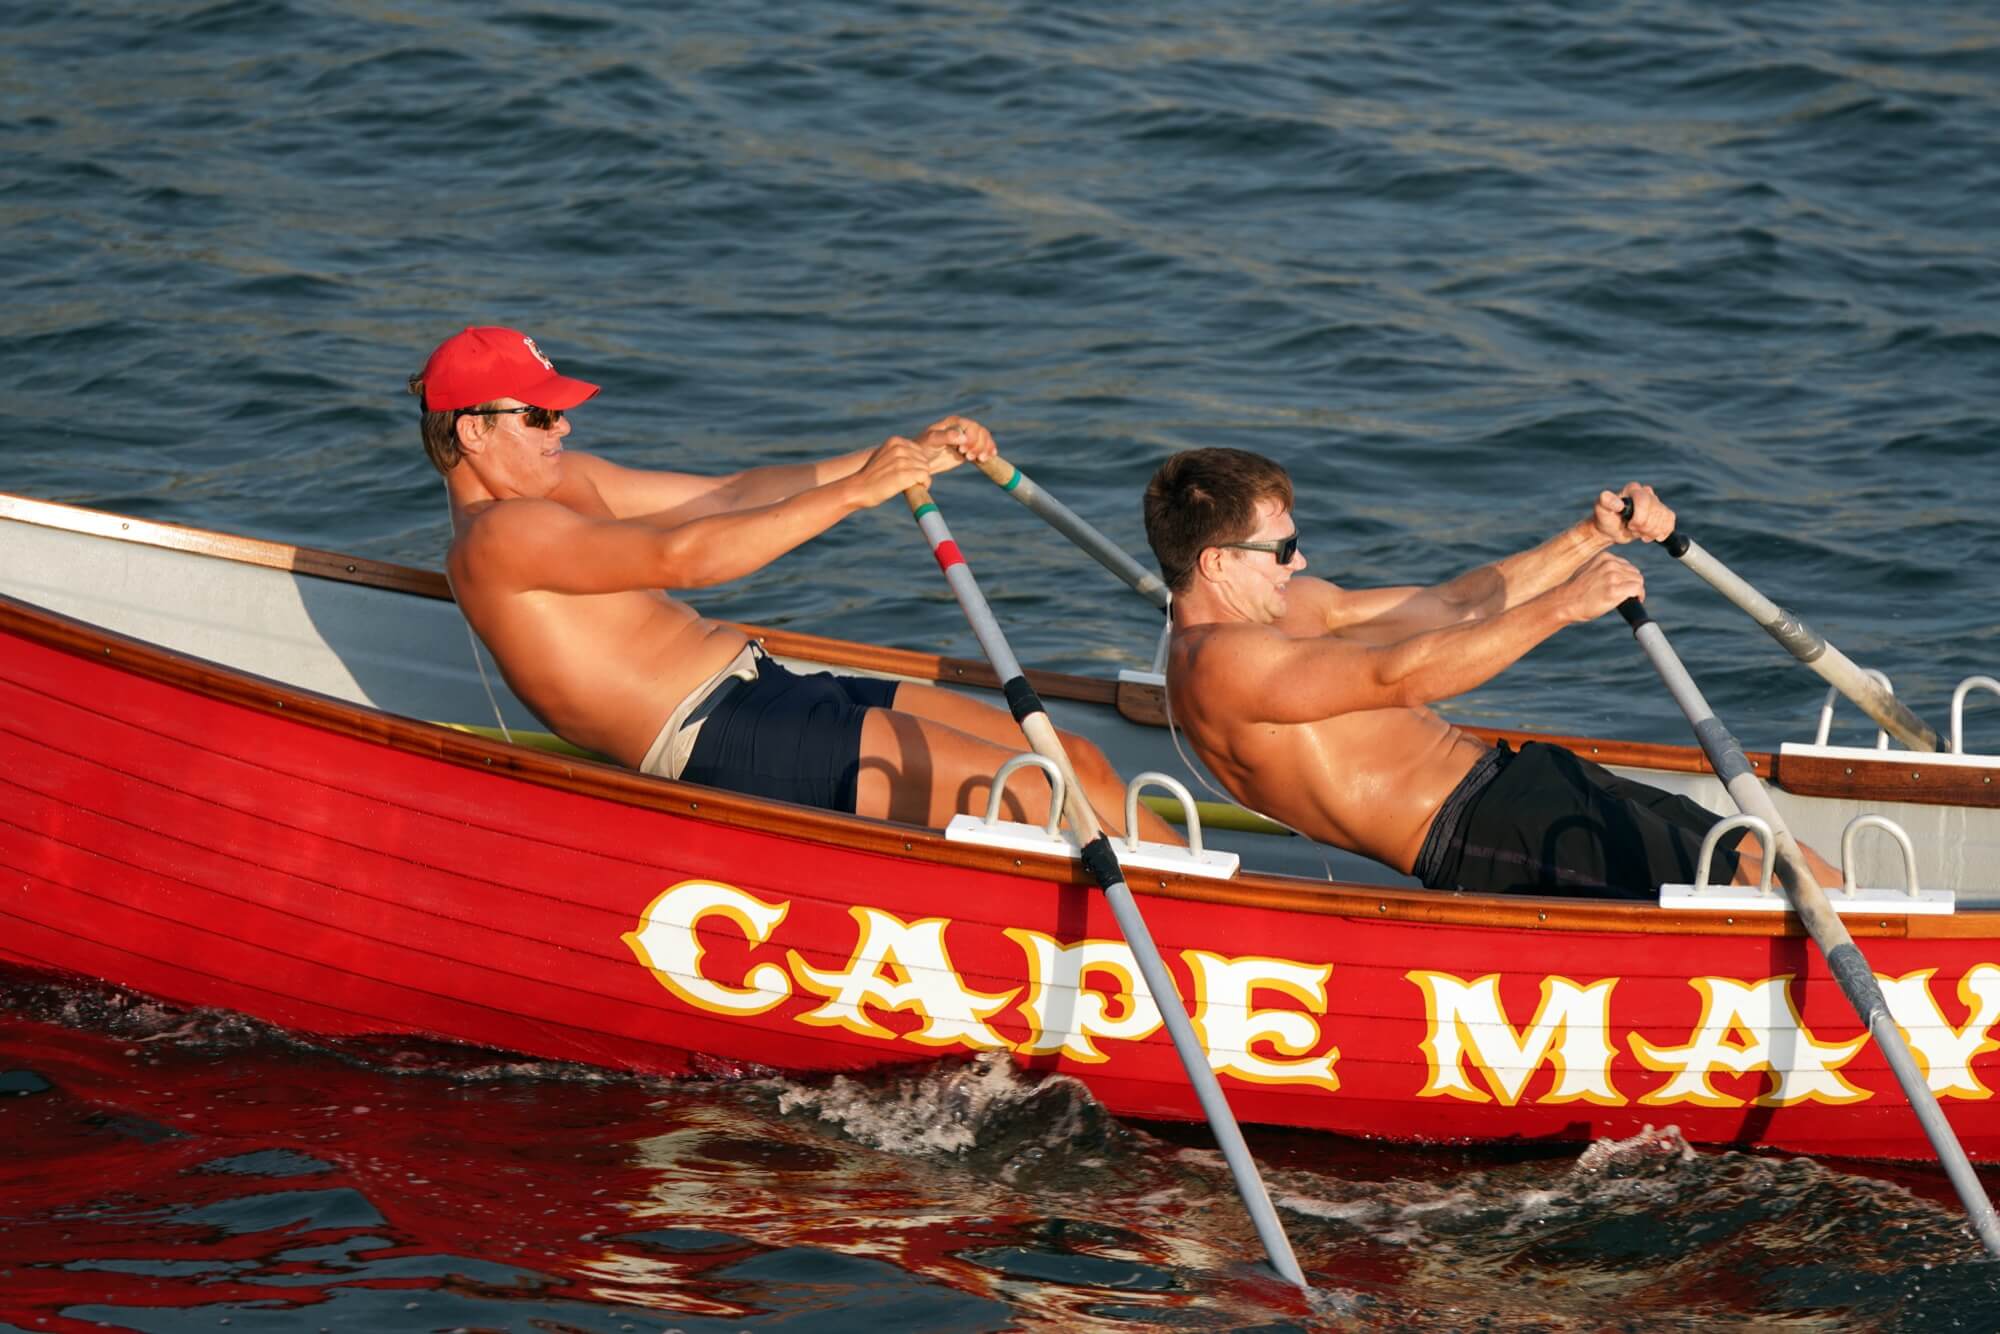 Cape May Beach Patrol's John Knies and Robert Moran lead the race pack all during the first half of the contest and finished eighth overall with time of 2 hours 46 minutes 54 seconds.  